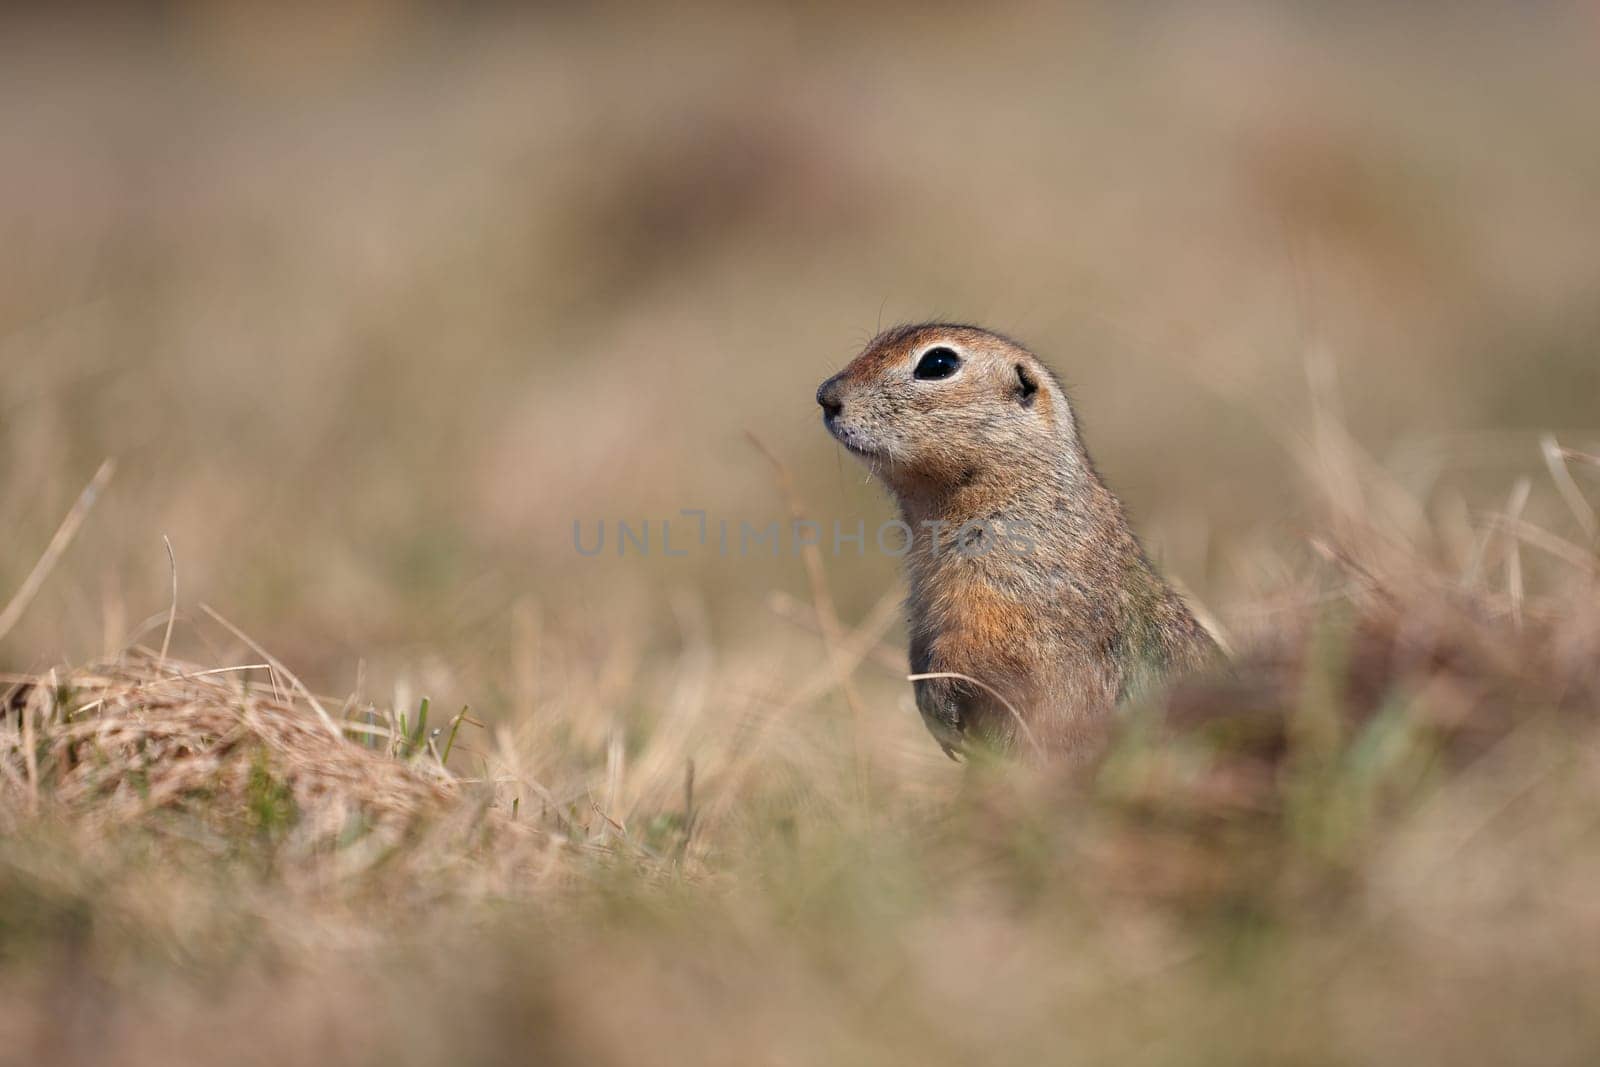 Portrait of a funny gopher, little ground squirrel or little suslik, Spermophilus pygmaeus is a species of rodent in the family Sciuridae. Suslik next to the hole. It is found from Eastern Europe by EvgeniyQW